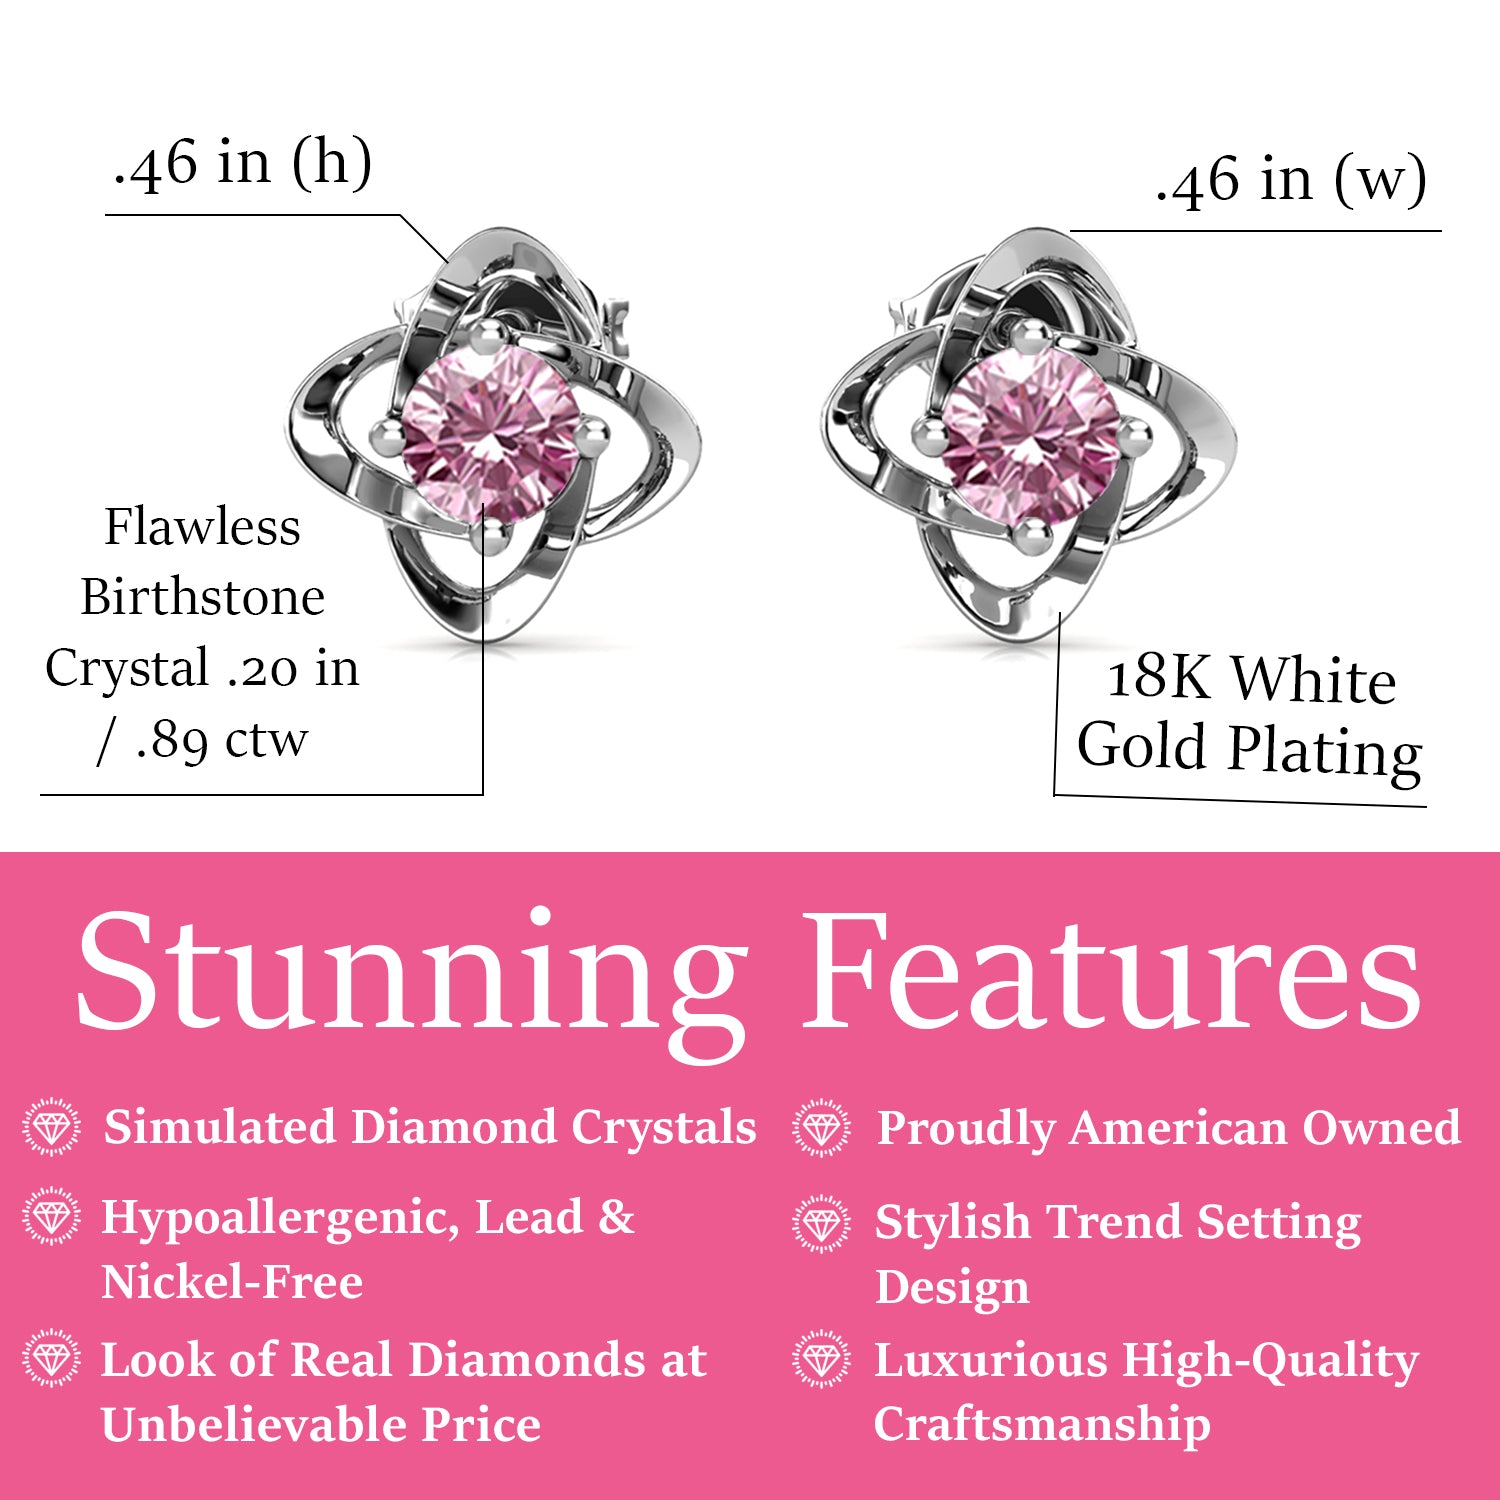 Infinity 18k White Gold Plated Birthstone Flower Earrings with Simulated Diamond Crystals